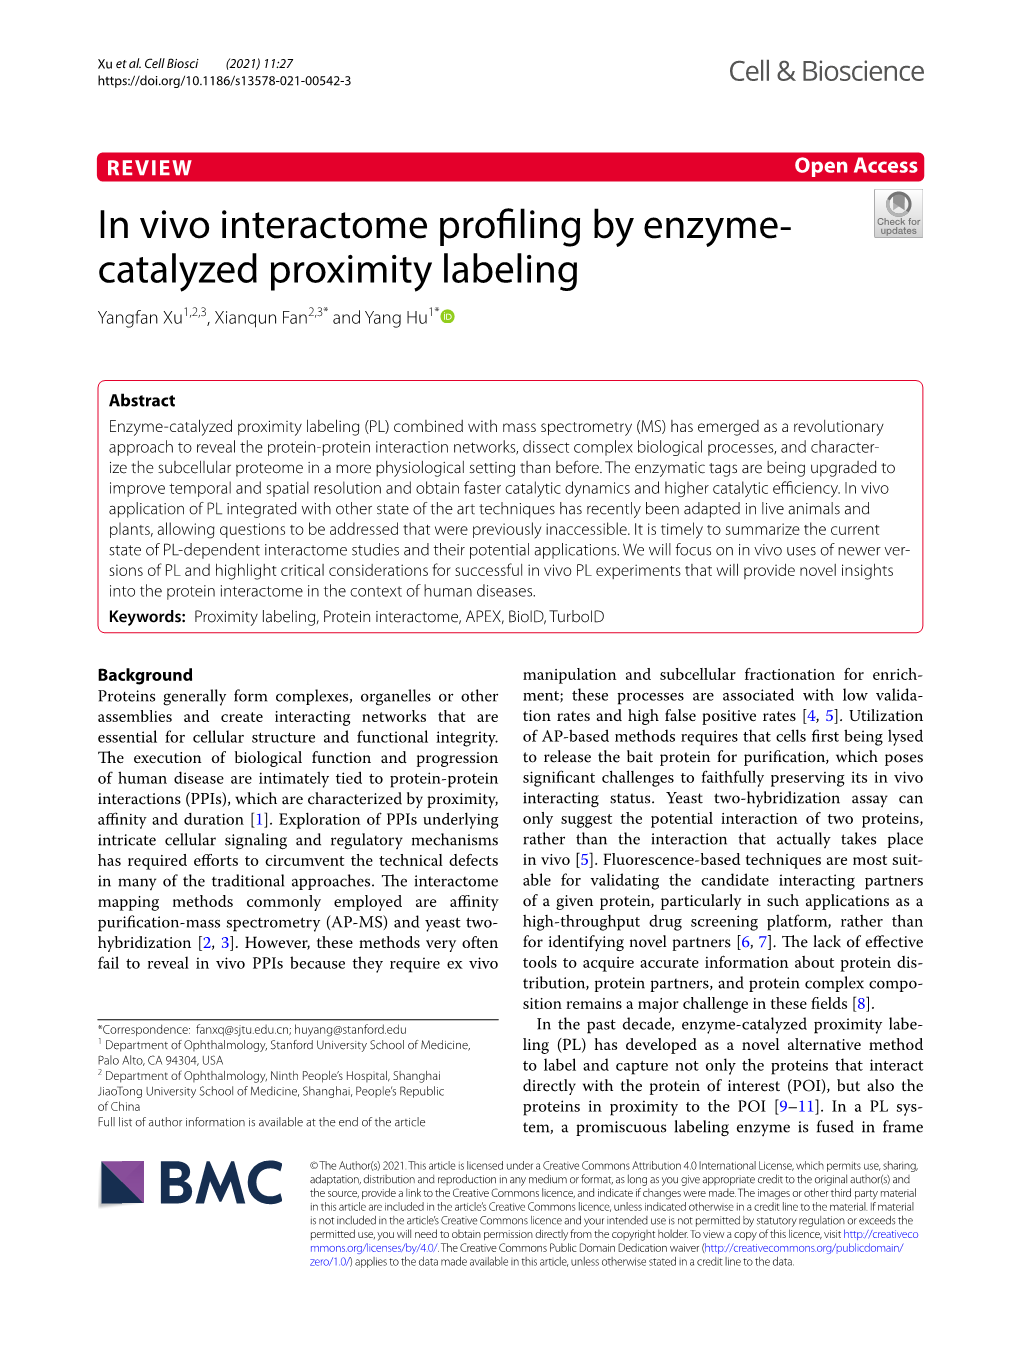 In Vivo Interactome Profiling by Enzyme‐Catalyzed Proximity Labeling